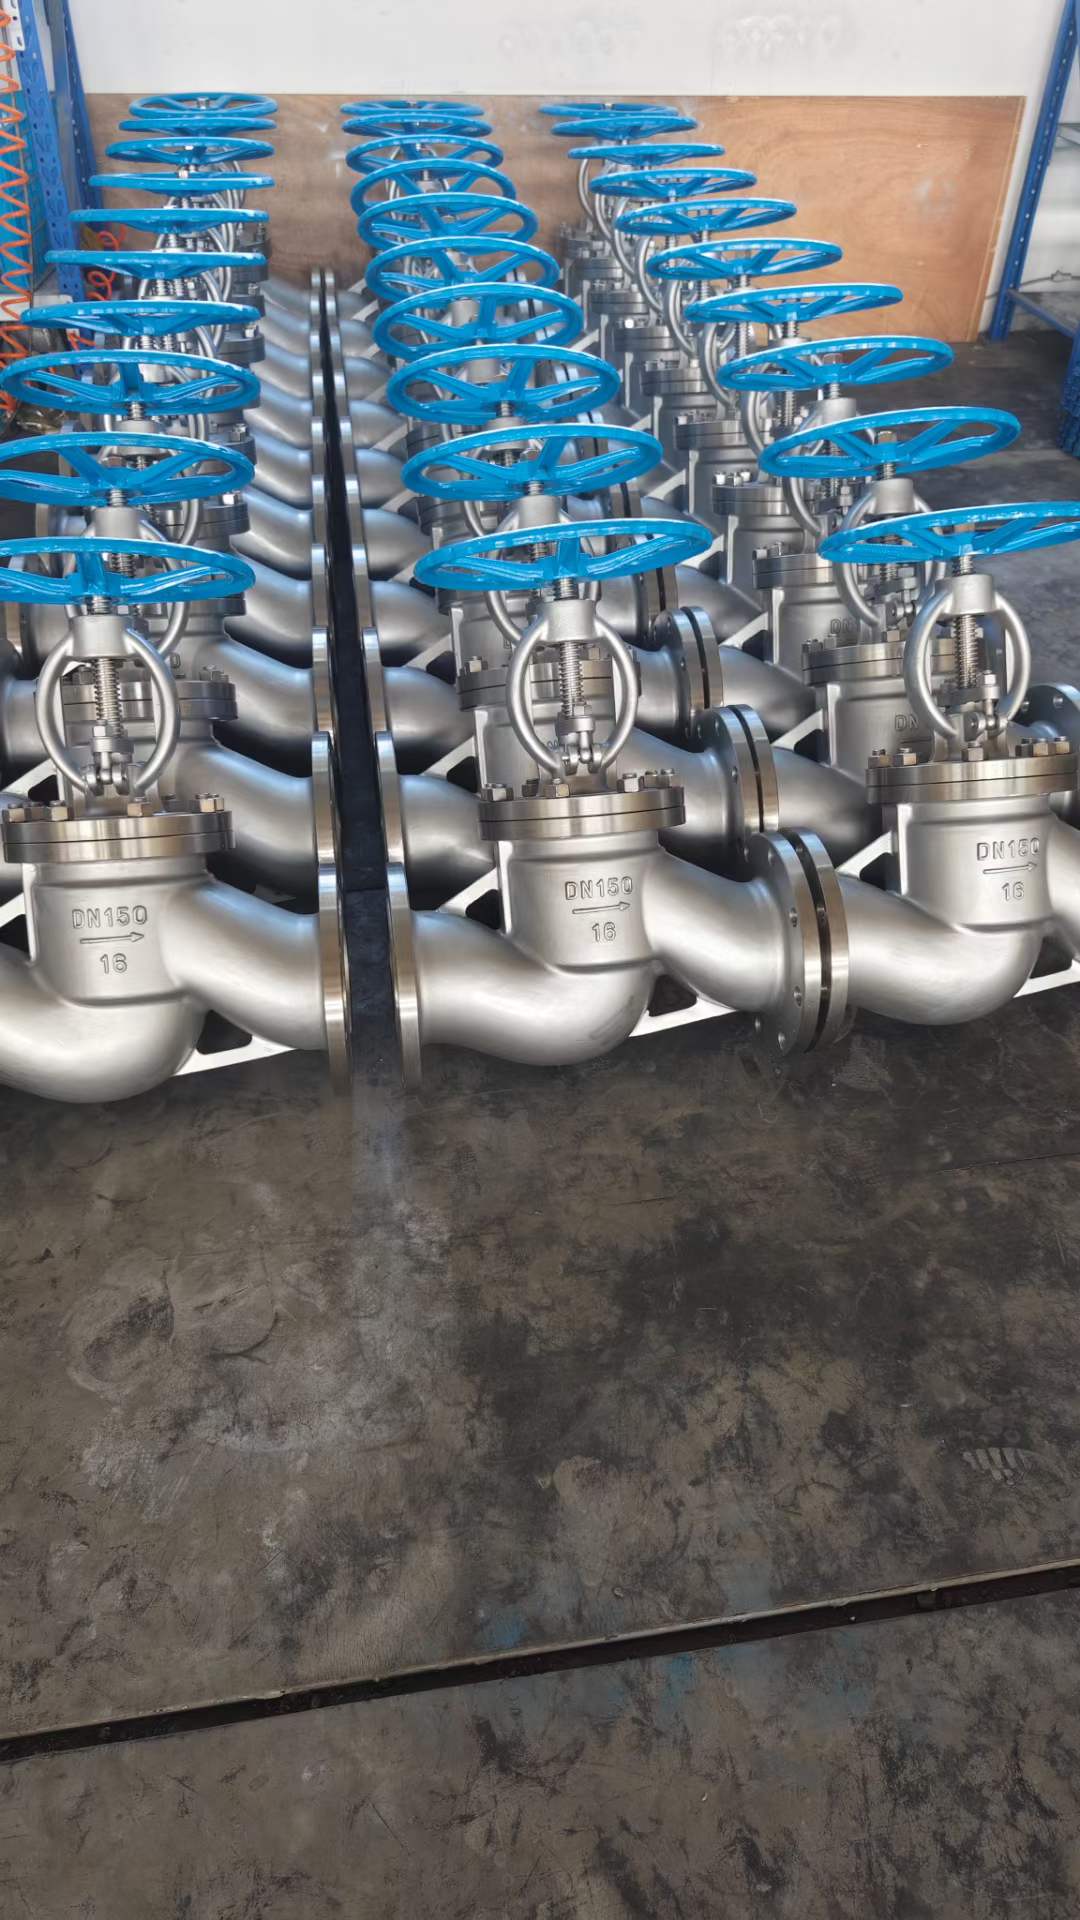 Global Stainless Steel Globe Valve Market Size, Share, Trends, Analysis and Forecast 2021-2026